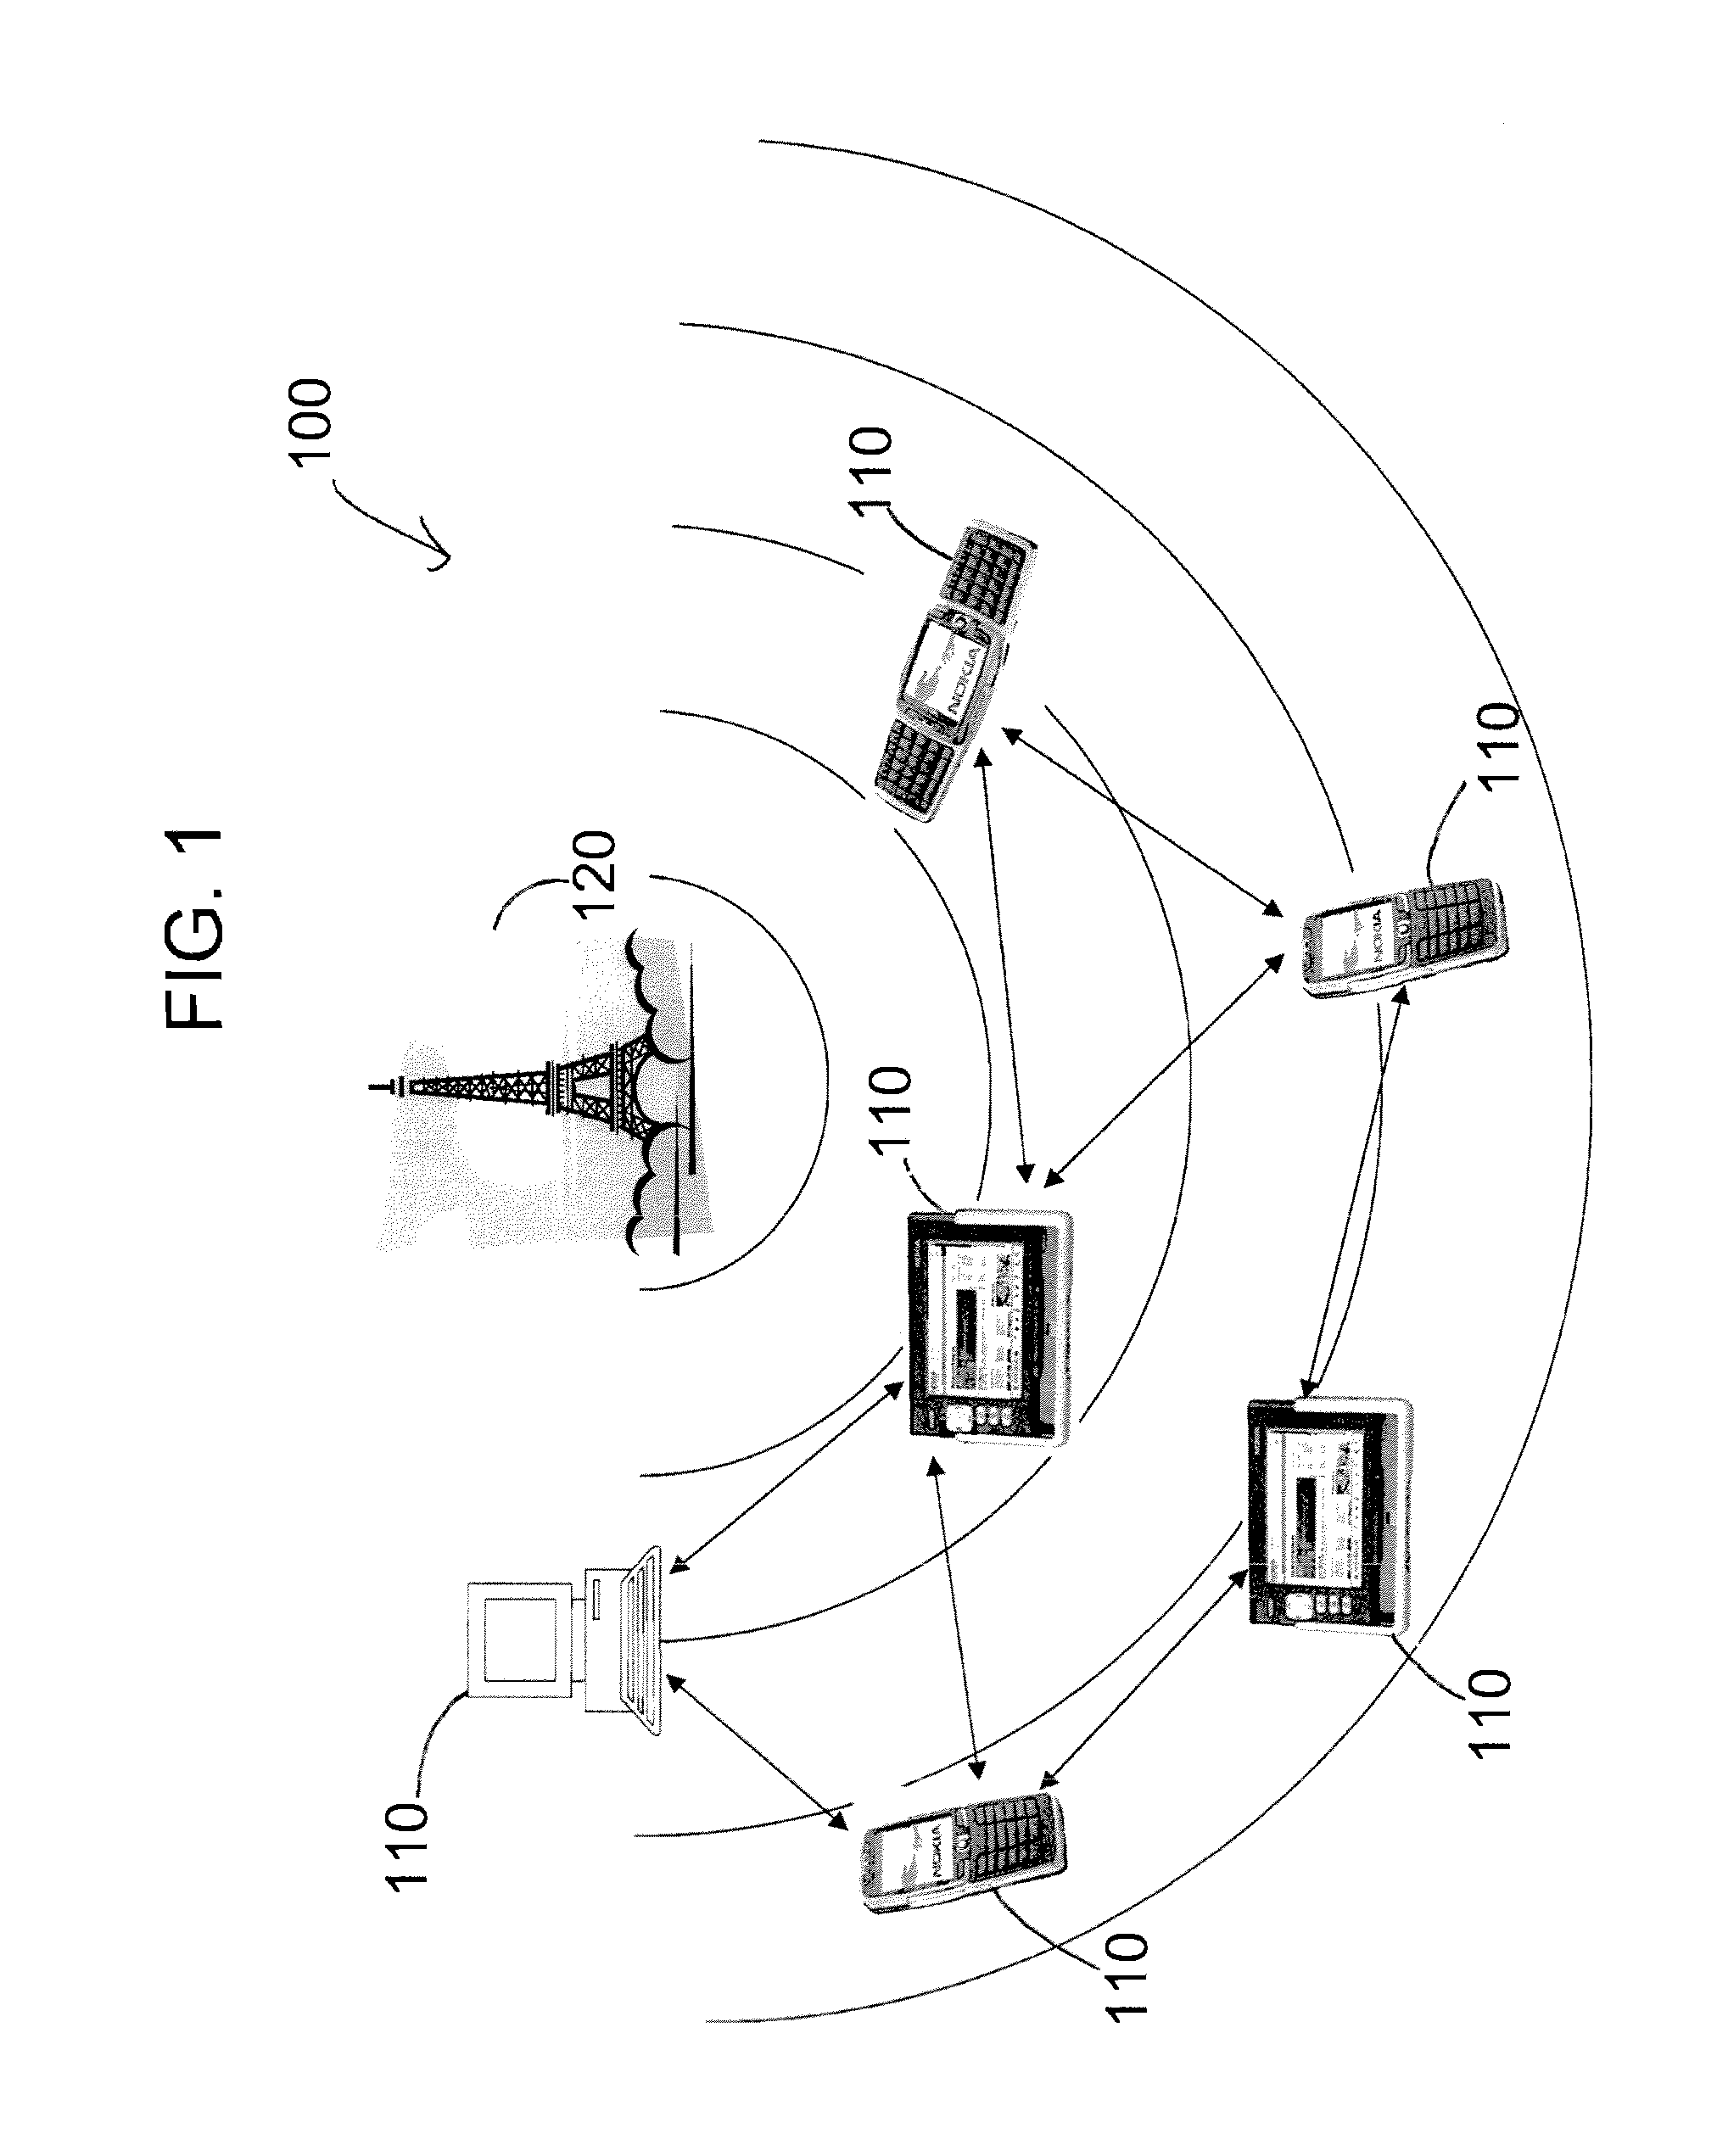 System and method for using a peer to peer mechanism to repair broadcast data in wireless digital broadcast networks